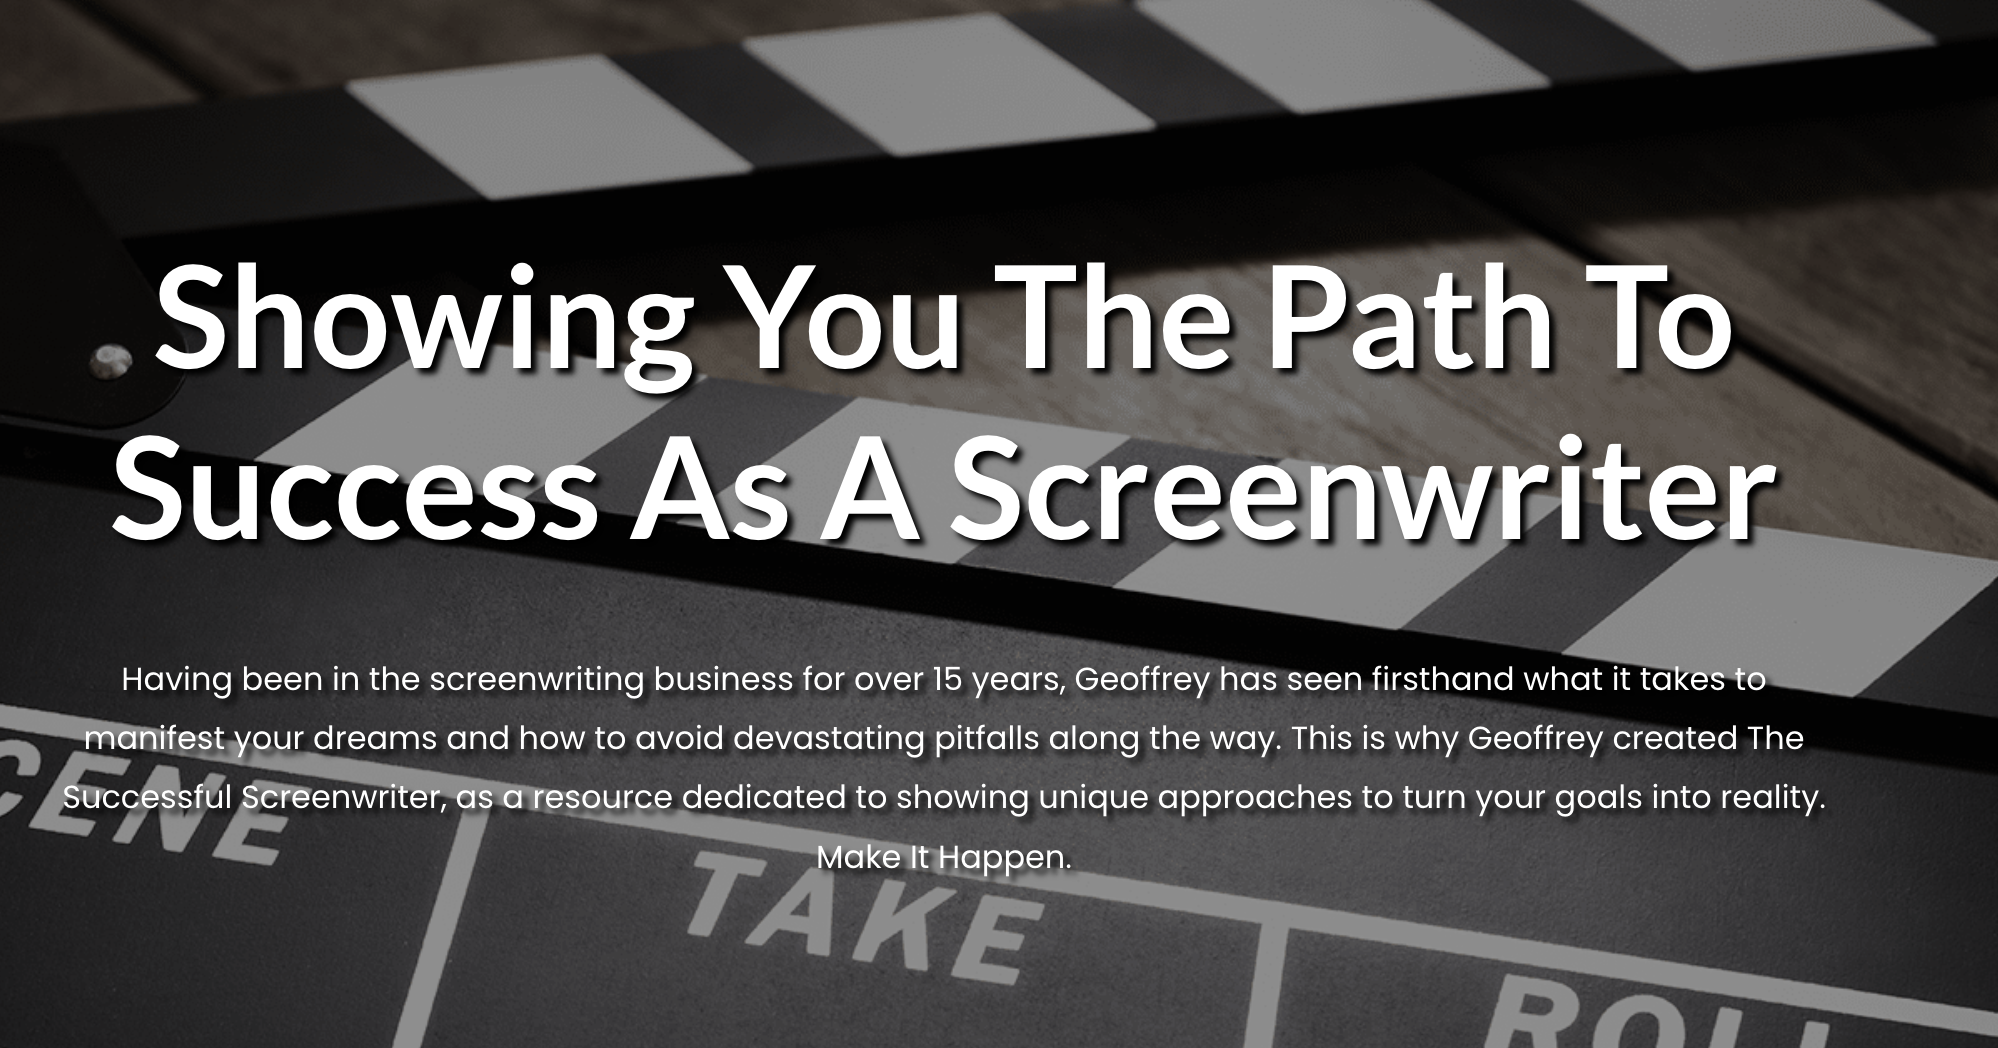 Win one of ten prizes for a 2-month membership to thesuccessfulscreenwriter.com